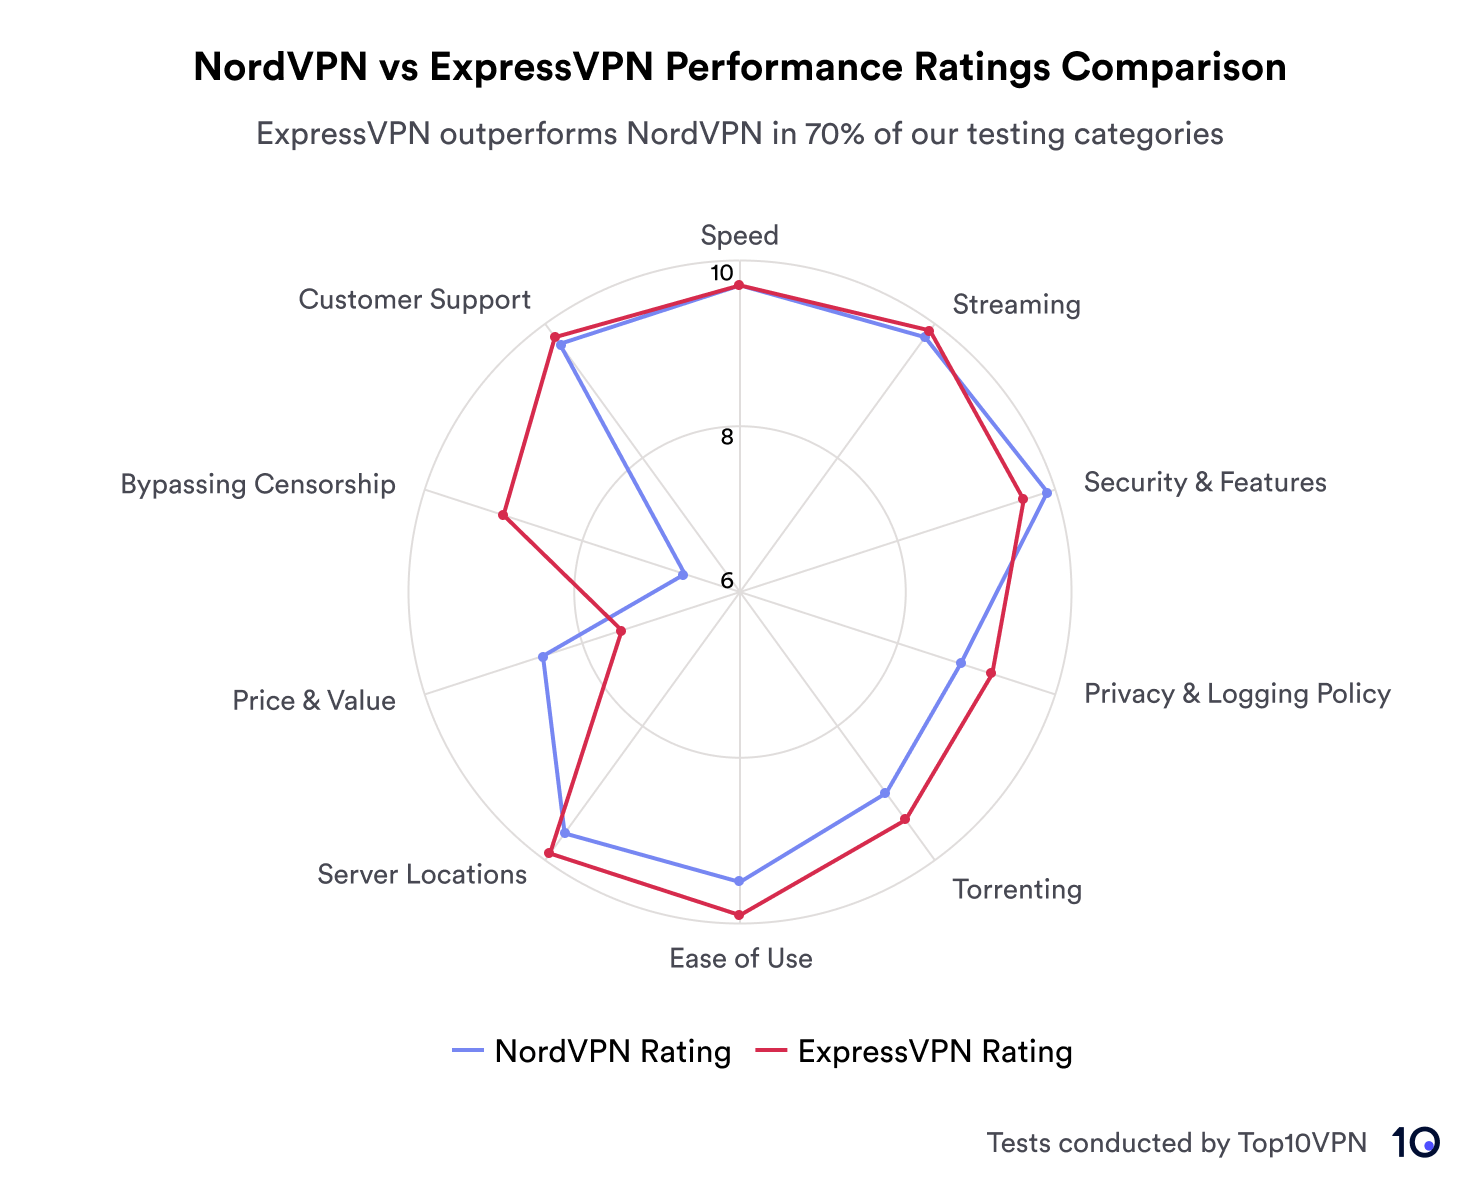 Radar chart shows ExpressVPN often outscoring NordVPN in categories such as streaming and privacy & logging policy